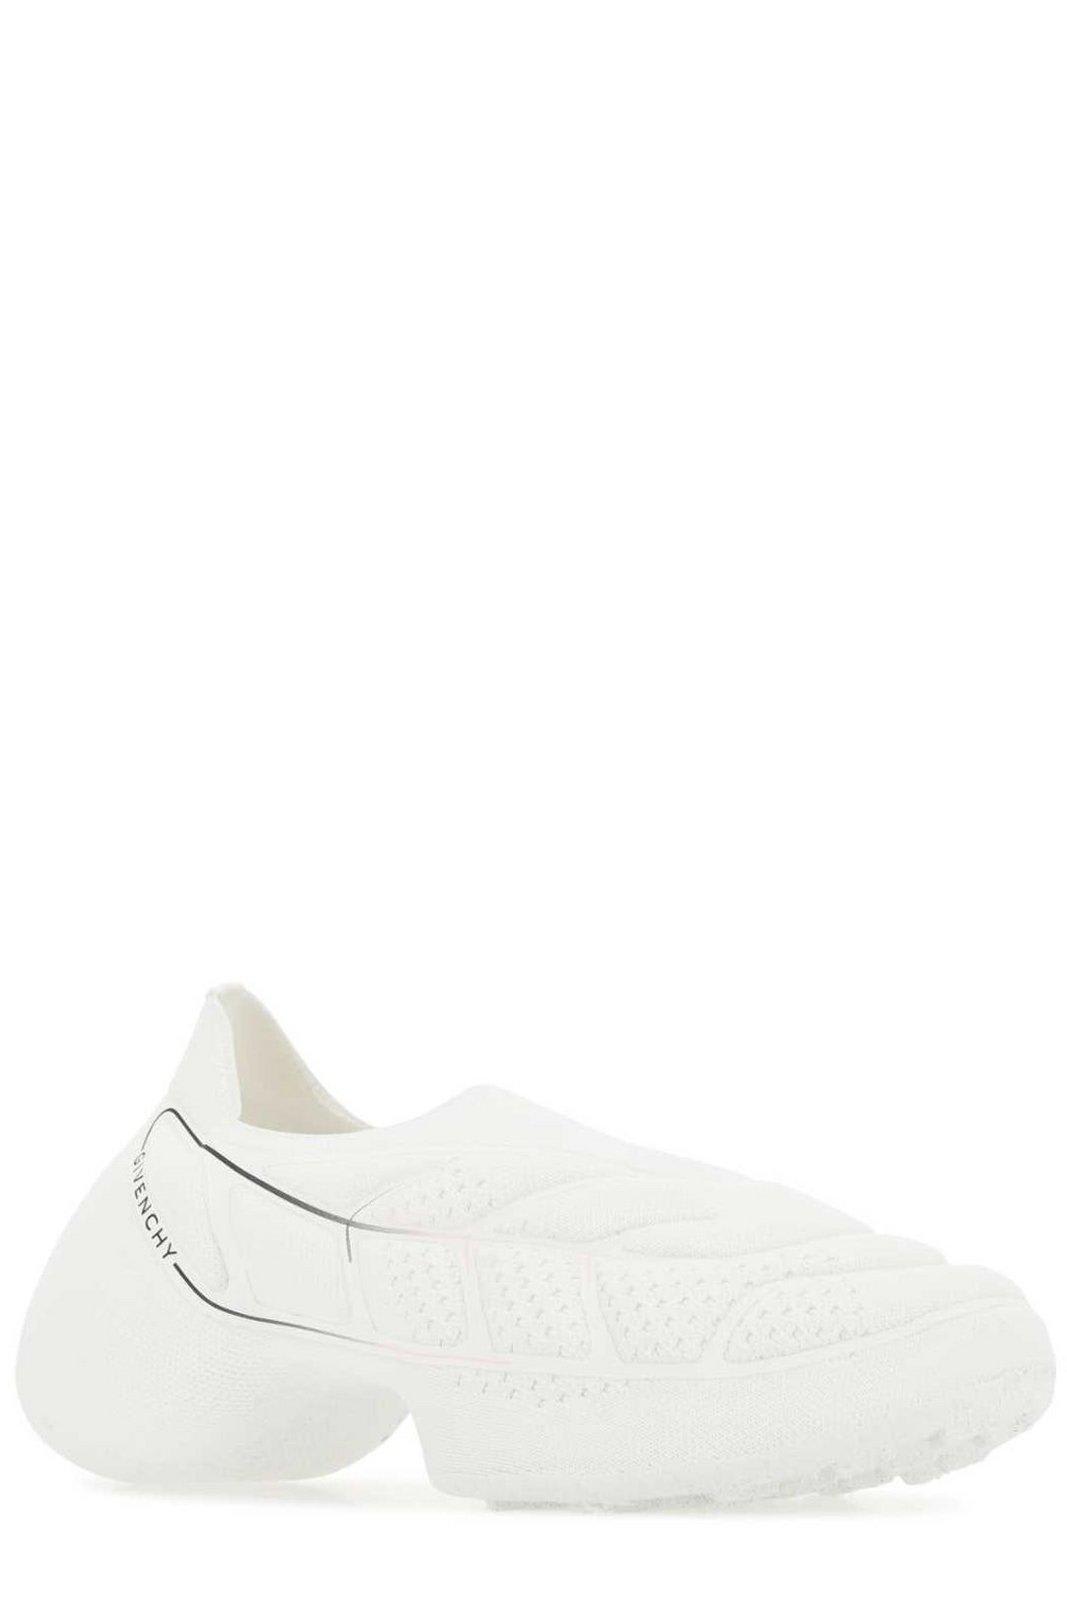 Shop Givenchy Tk-360 Slip-on Sneakers In White